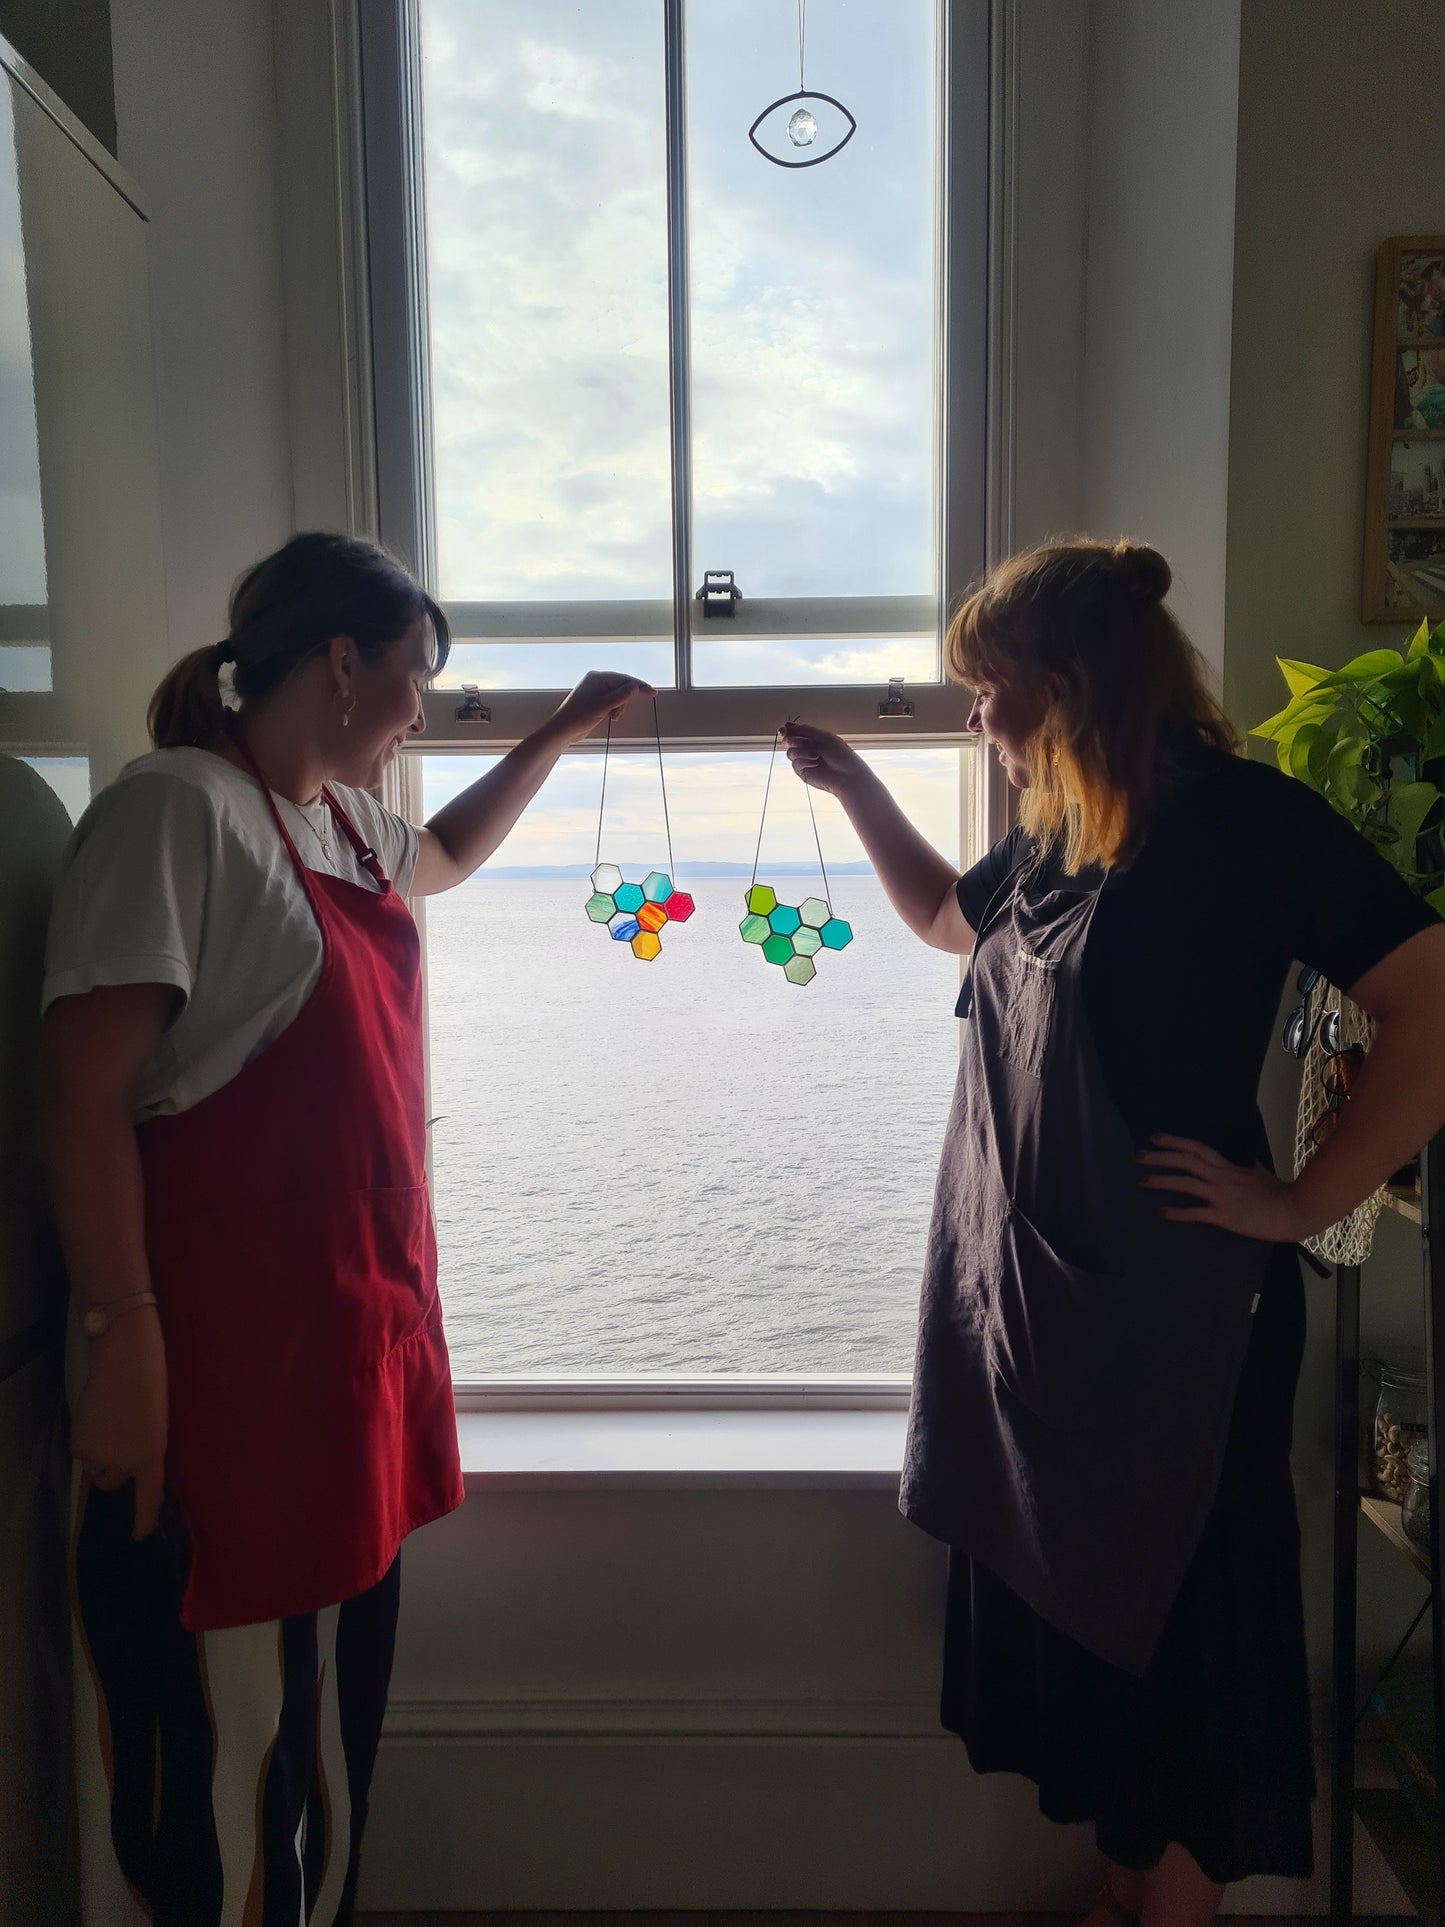 Beginners Stained Glass Workshop - Panoramic Sea View